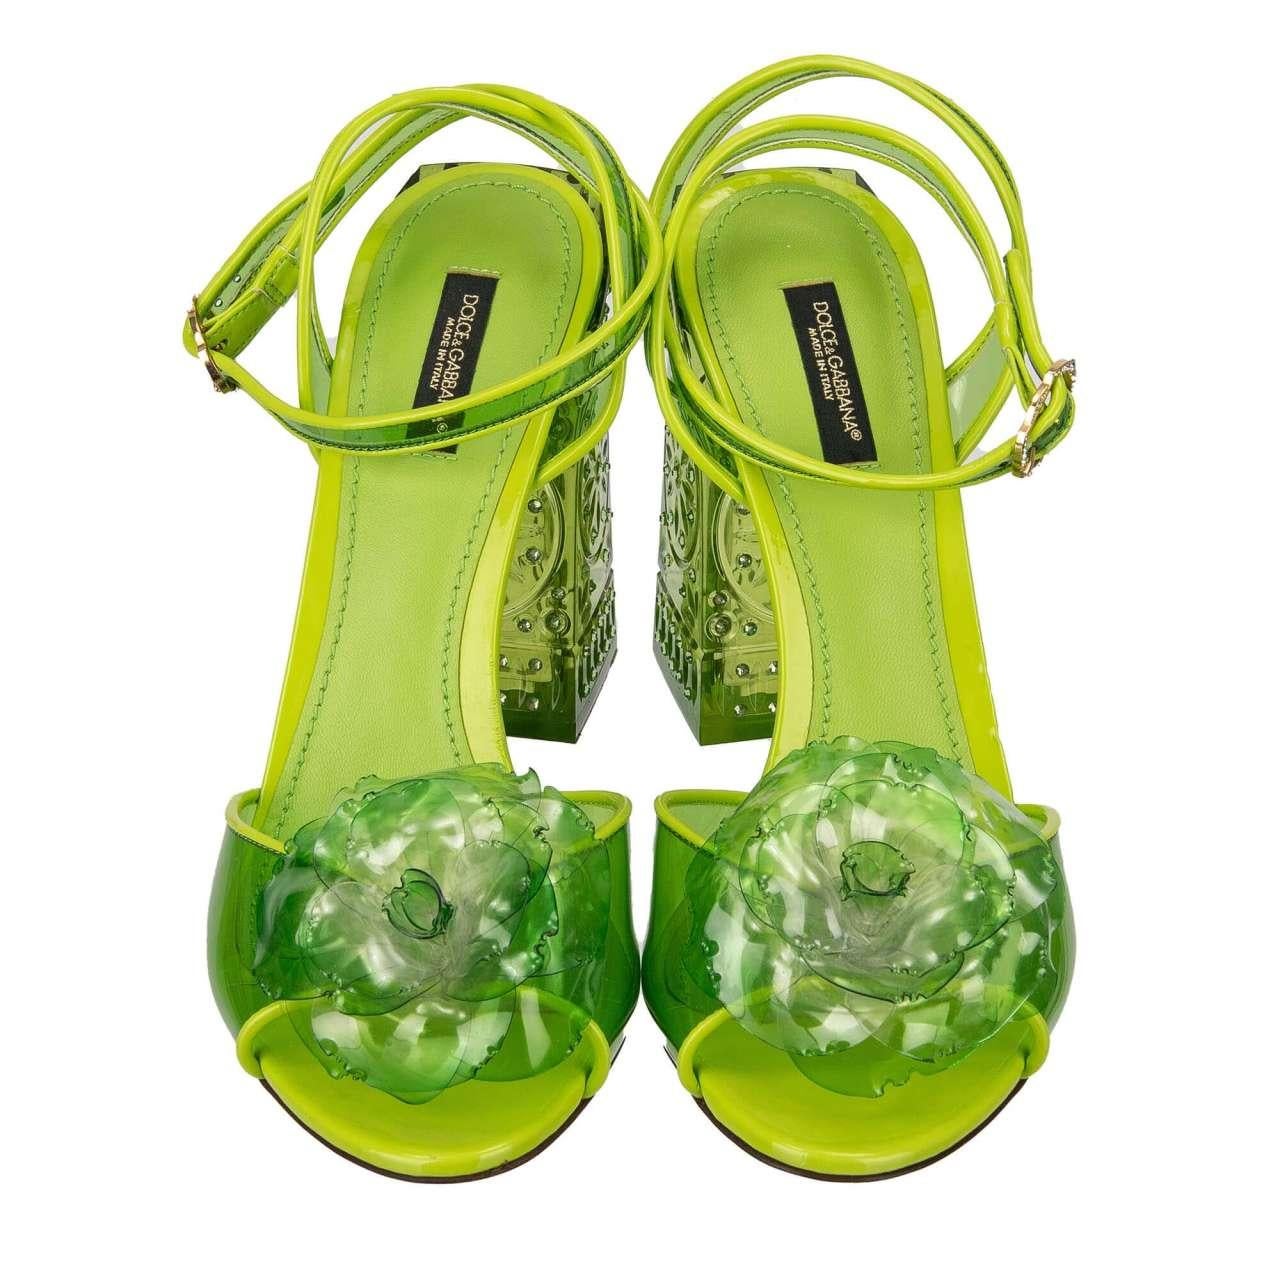 - Cinderella Crystal Heel Sandals KEIRA with flower in green by DOLCE & GABBANA - MADE IN ITALY - RUNWAY - Dolce & Gabbana Fashion Show - New with Box - Model: CR0736-AZ583-80520 - Material: 80% PVC, 12% Plastic, 3% Cotton - Inside Material: Leather